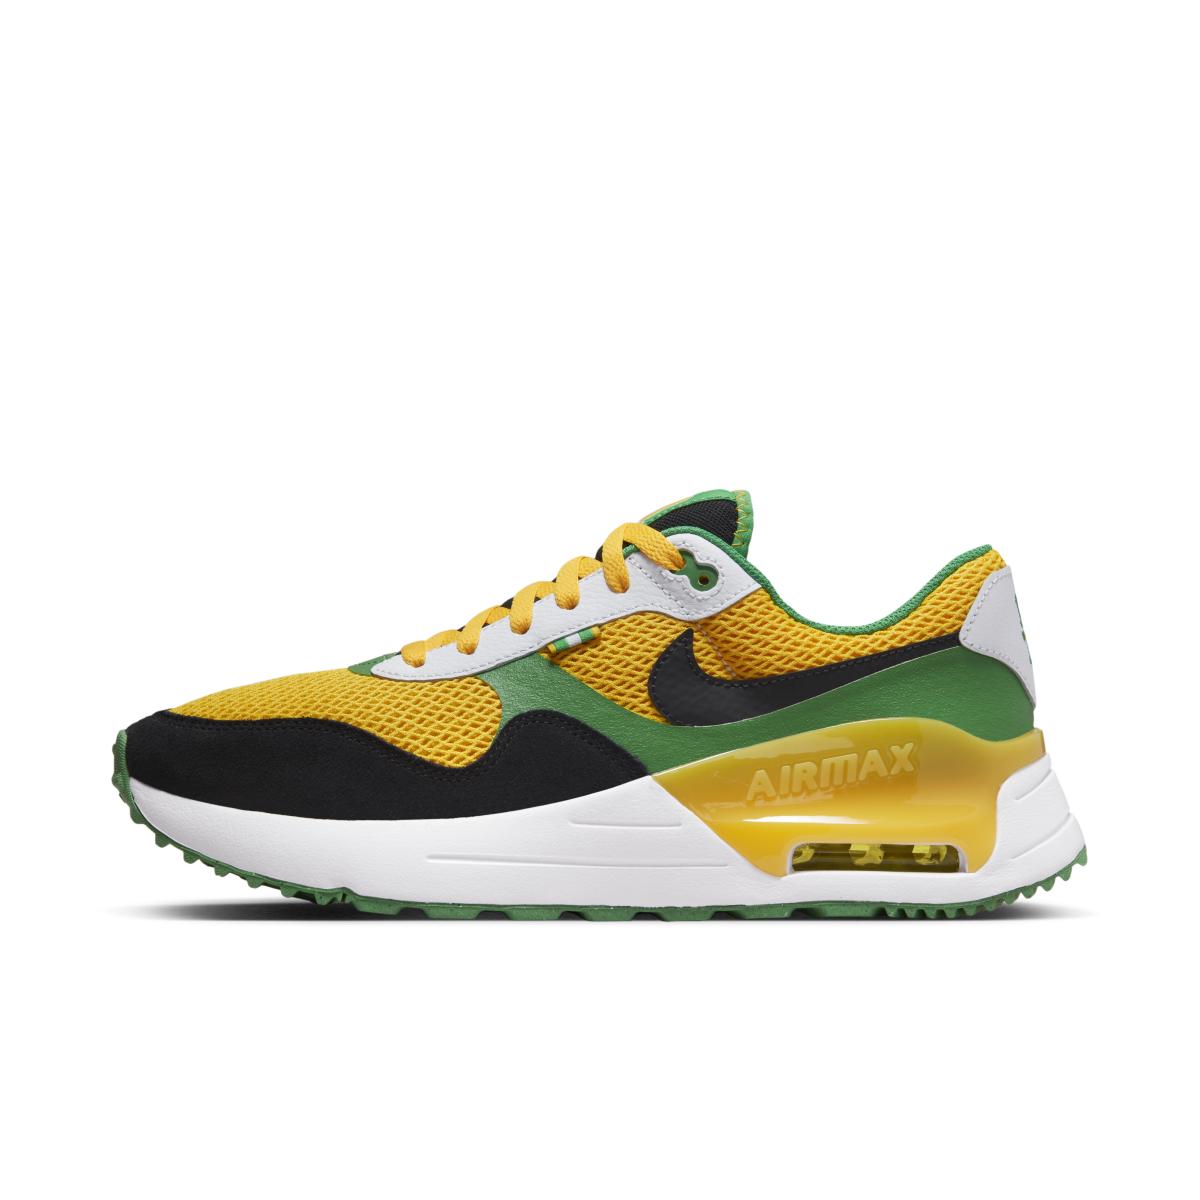 Oregon Ducks Nike Air Max Collection, how to buy your Ducks Air Max ...